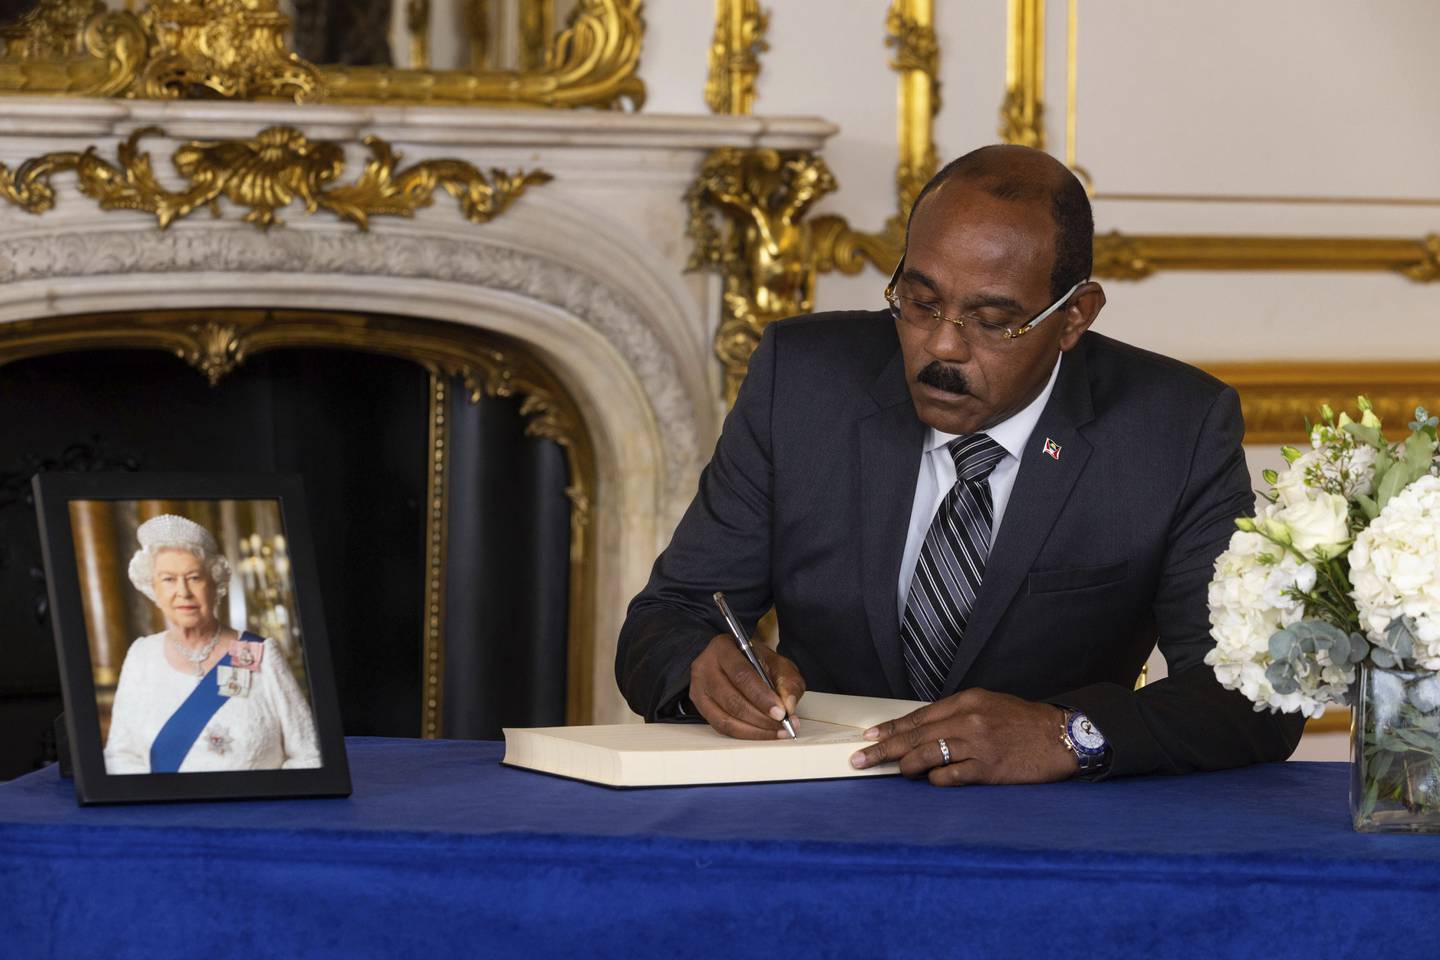 Gaston Browne, Prime Minister of Antigua and Barbuda, signs a book of condolence on the death of Queen Elizabeth at Lancaster House in London. AP